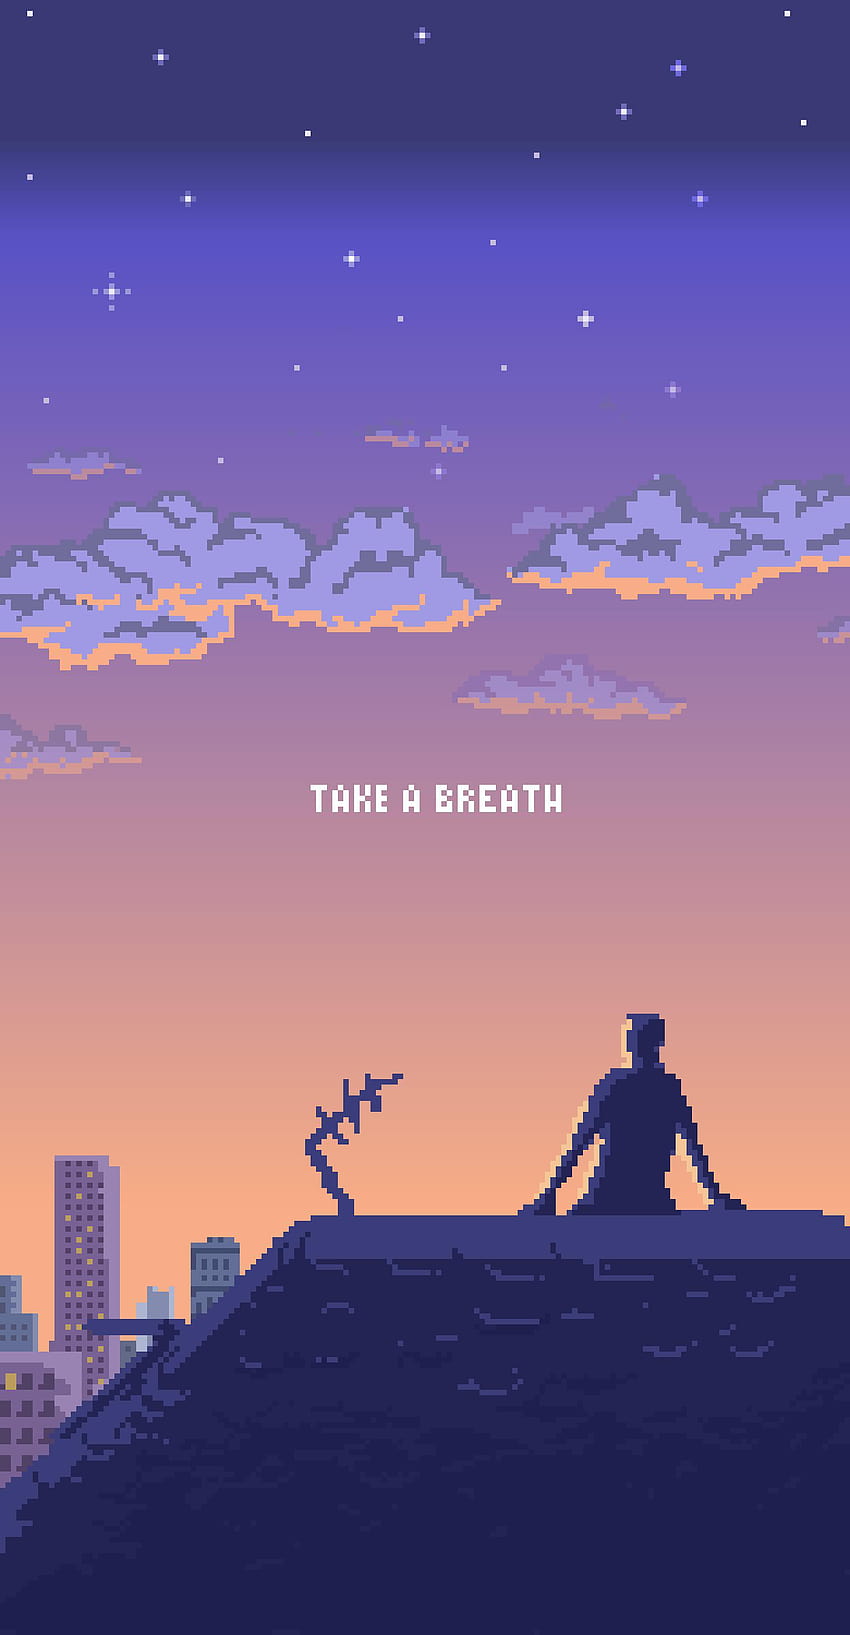 Back with more lofi pixel stuff! Feel to use as phone . Hope you all enjoy ✌️DM if wanting to use for song covers etc : r/lofi, lofi mobile HD phone wallpaper